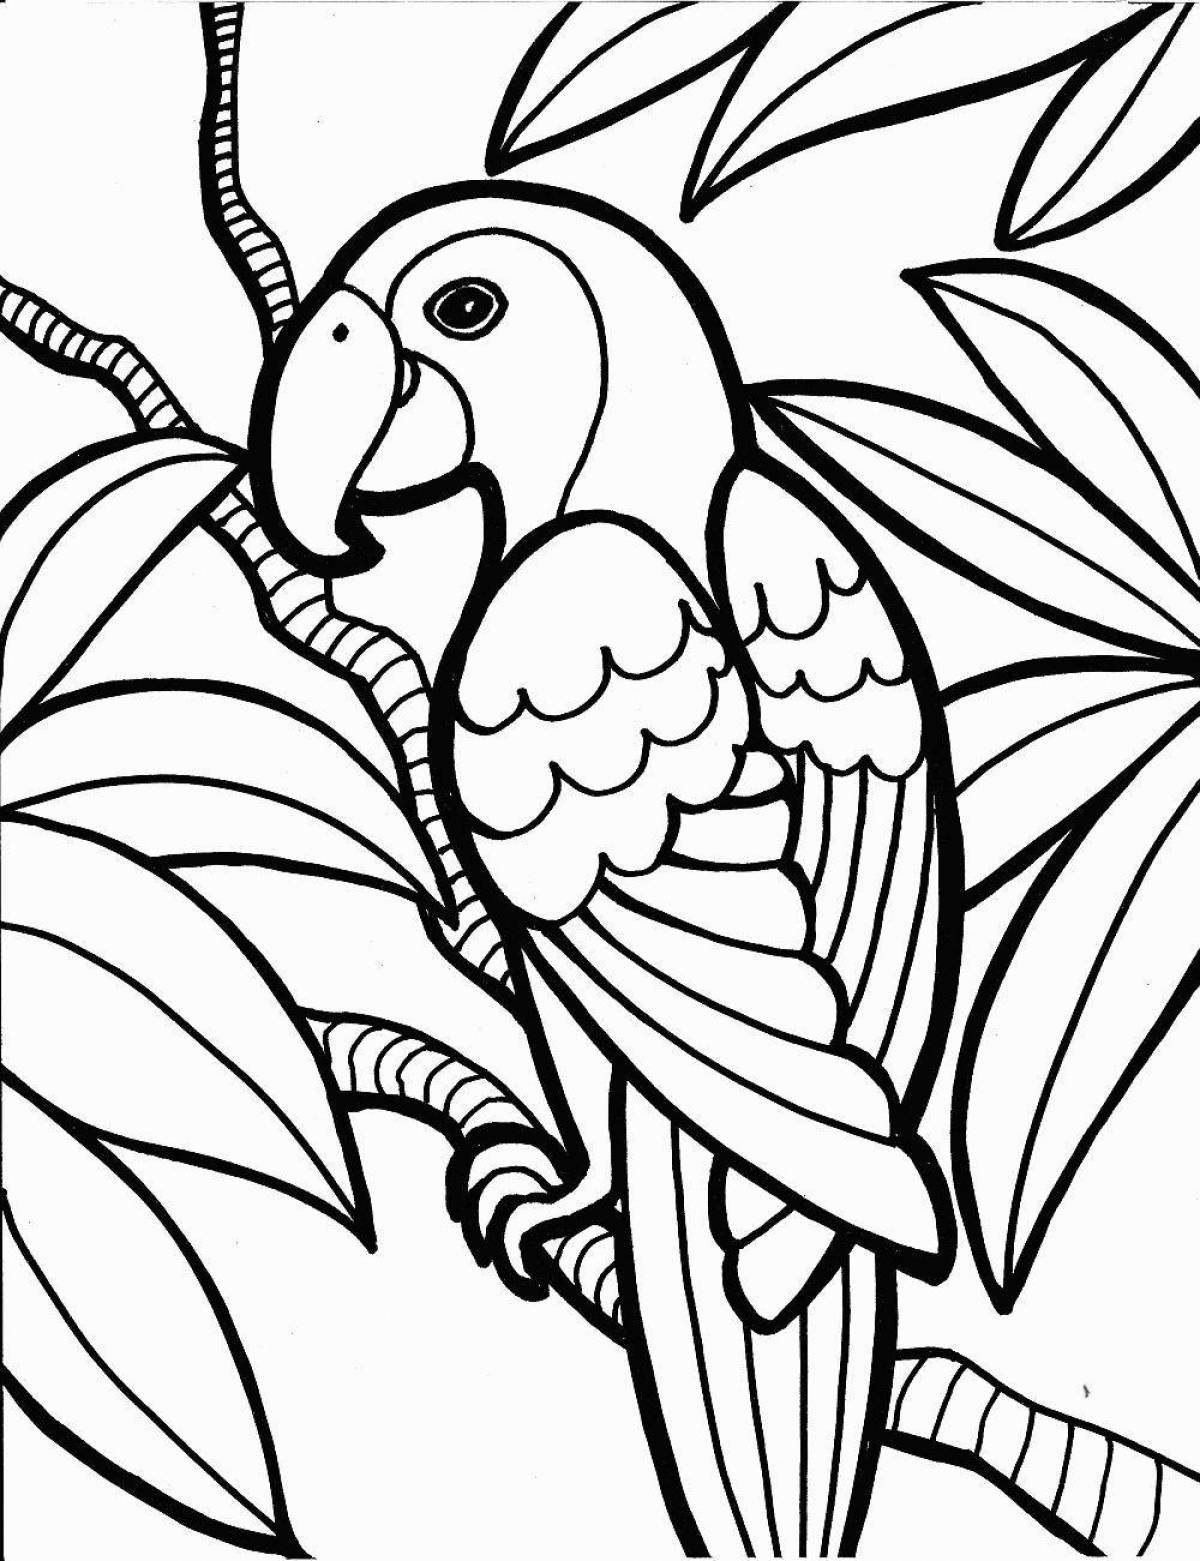 Brilliant parrot coloring book for 3-4 year olds